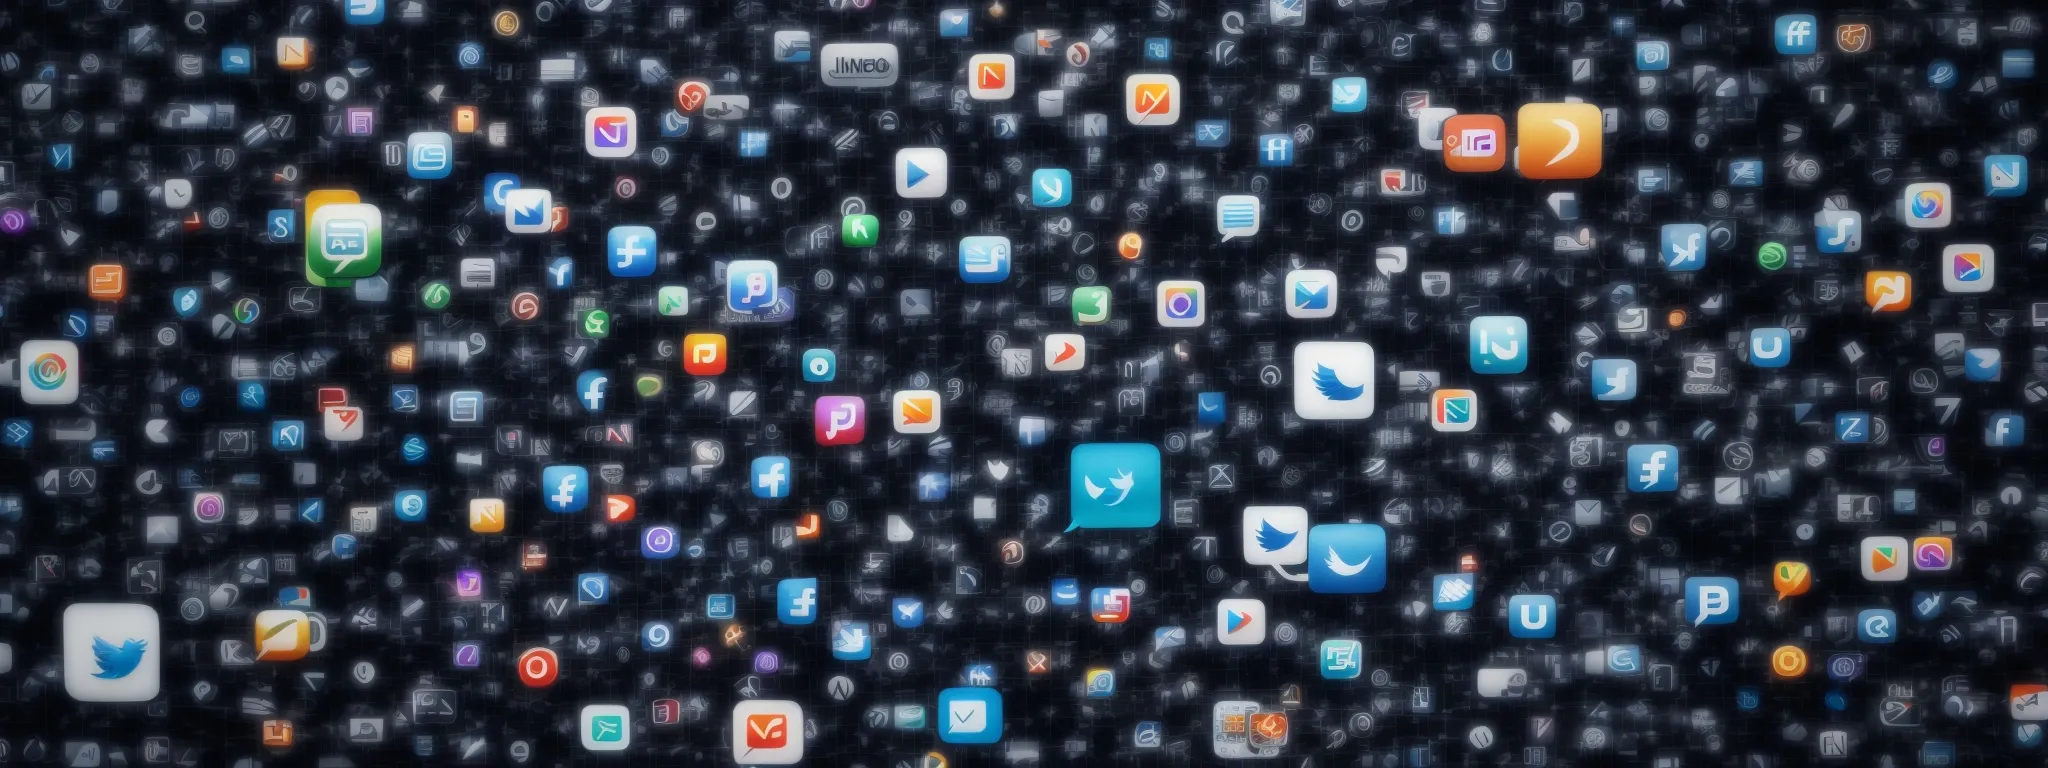 a bustling network of interconnected social media icons overshadowing a magnified search bar amidst abstract internet clouds.